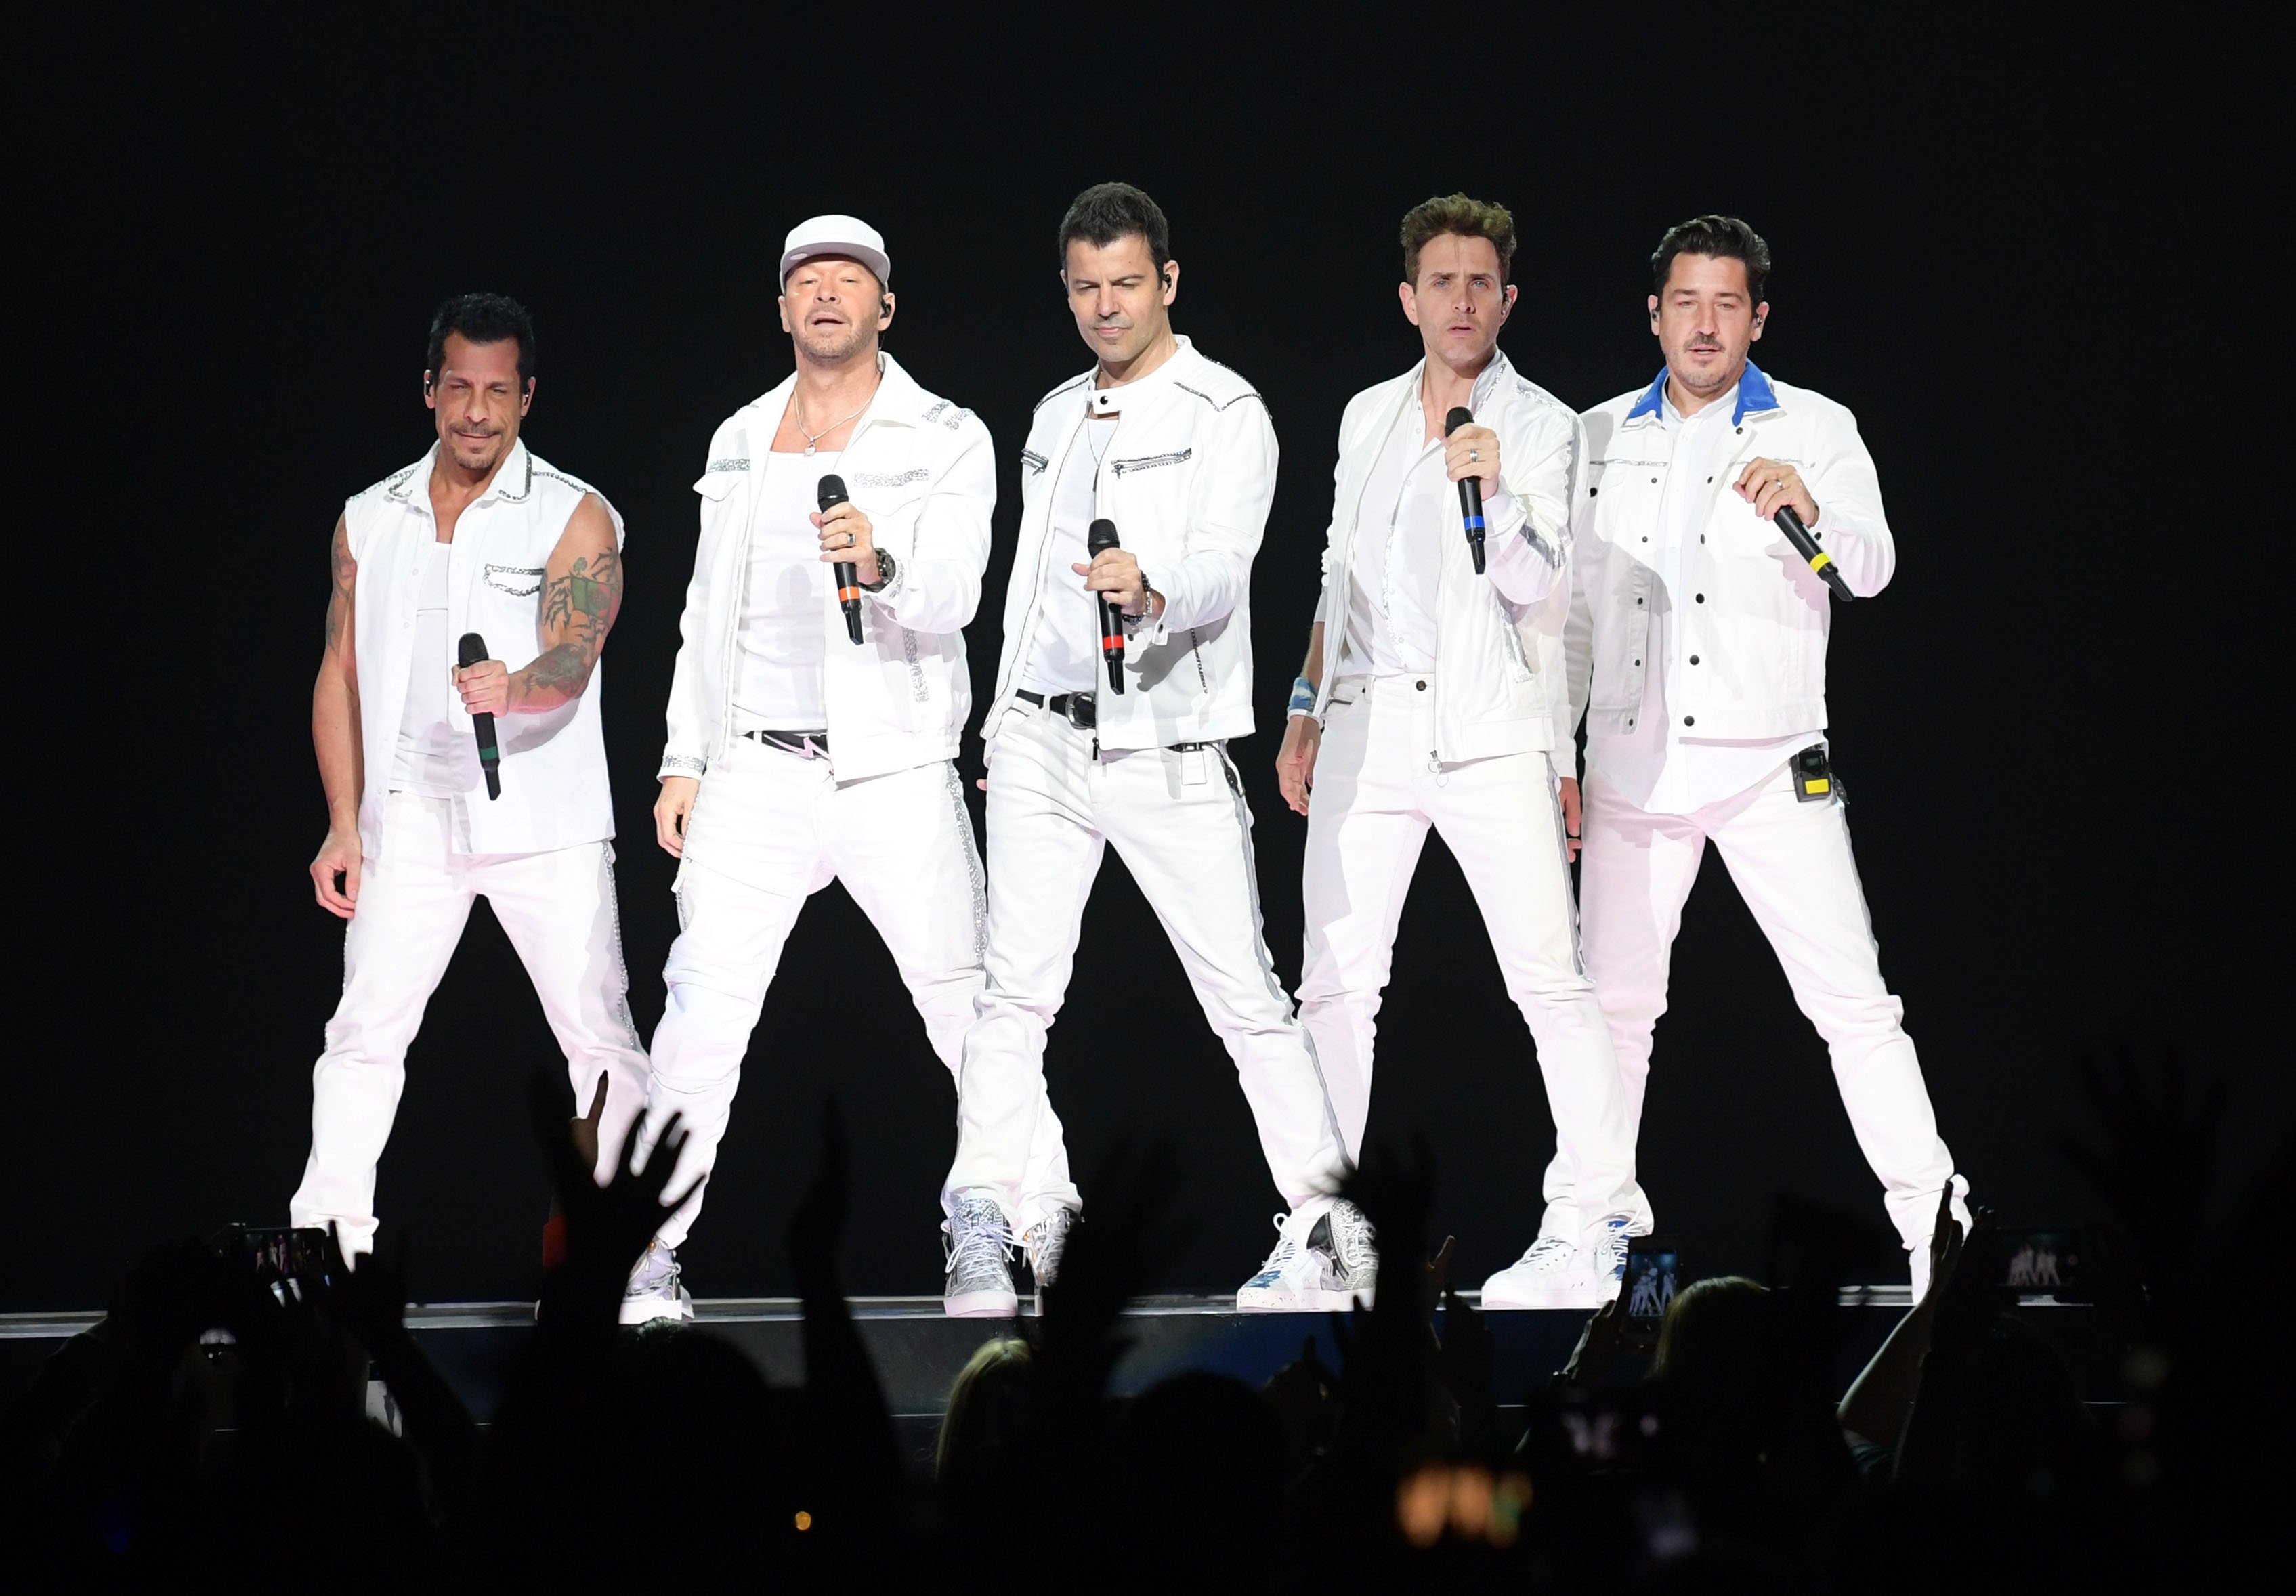 (L-R): Danny Wood, Donnie Wahlberg, Jordan Knight, Joey McIntyre and Jonathan Knight of the musical group NKOTB performing onstage